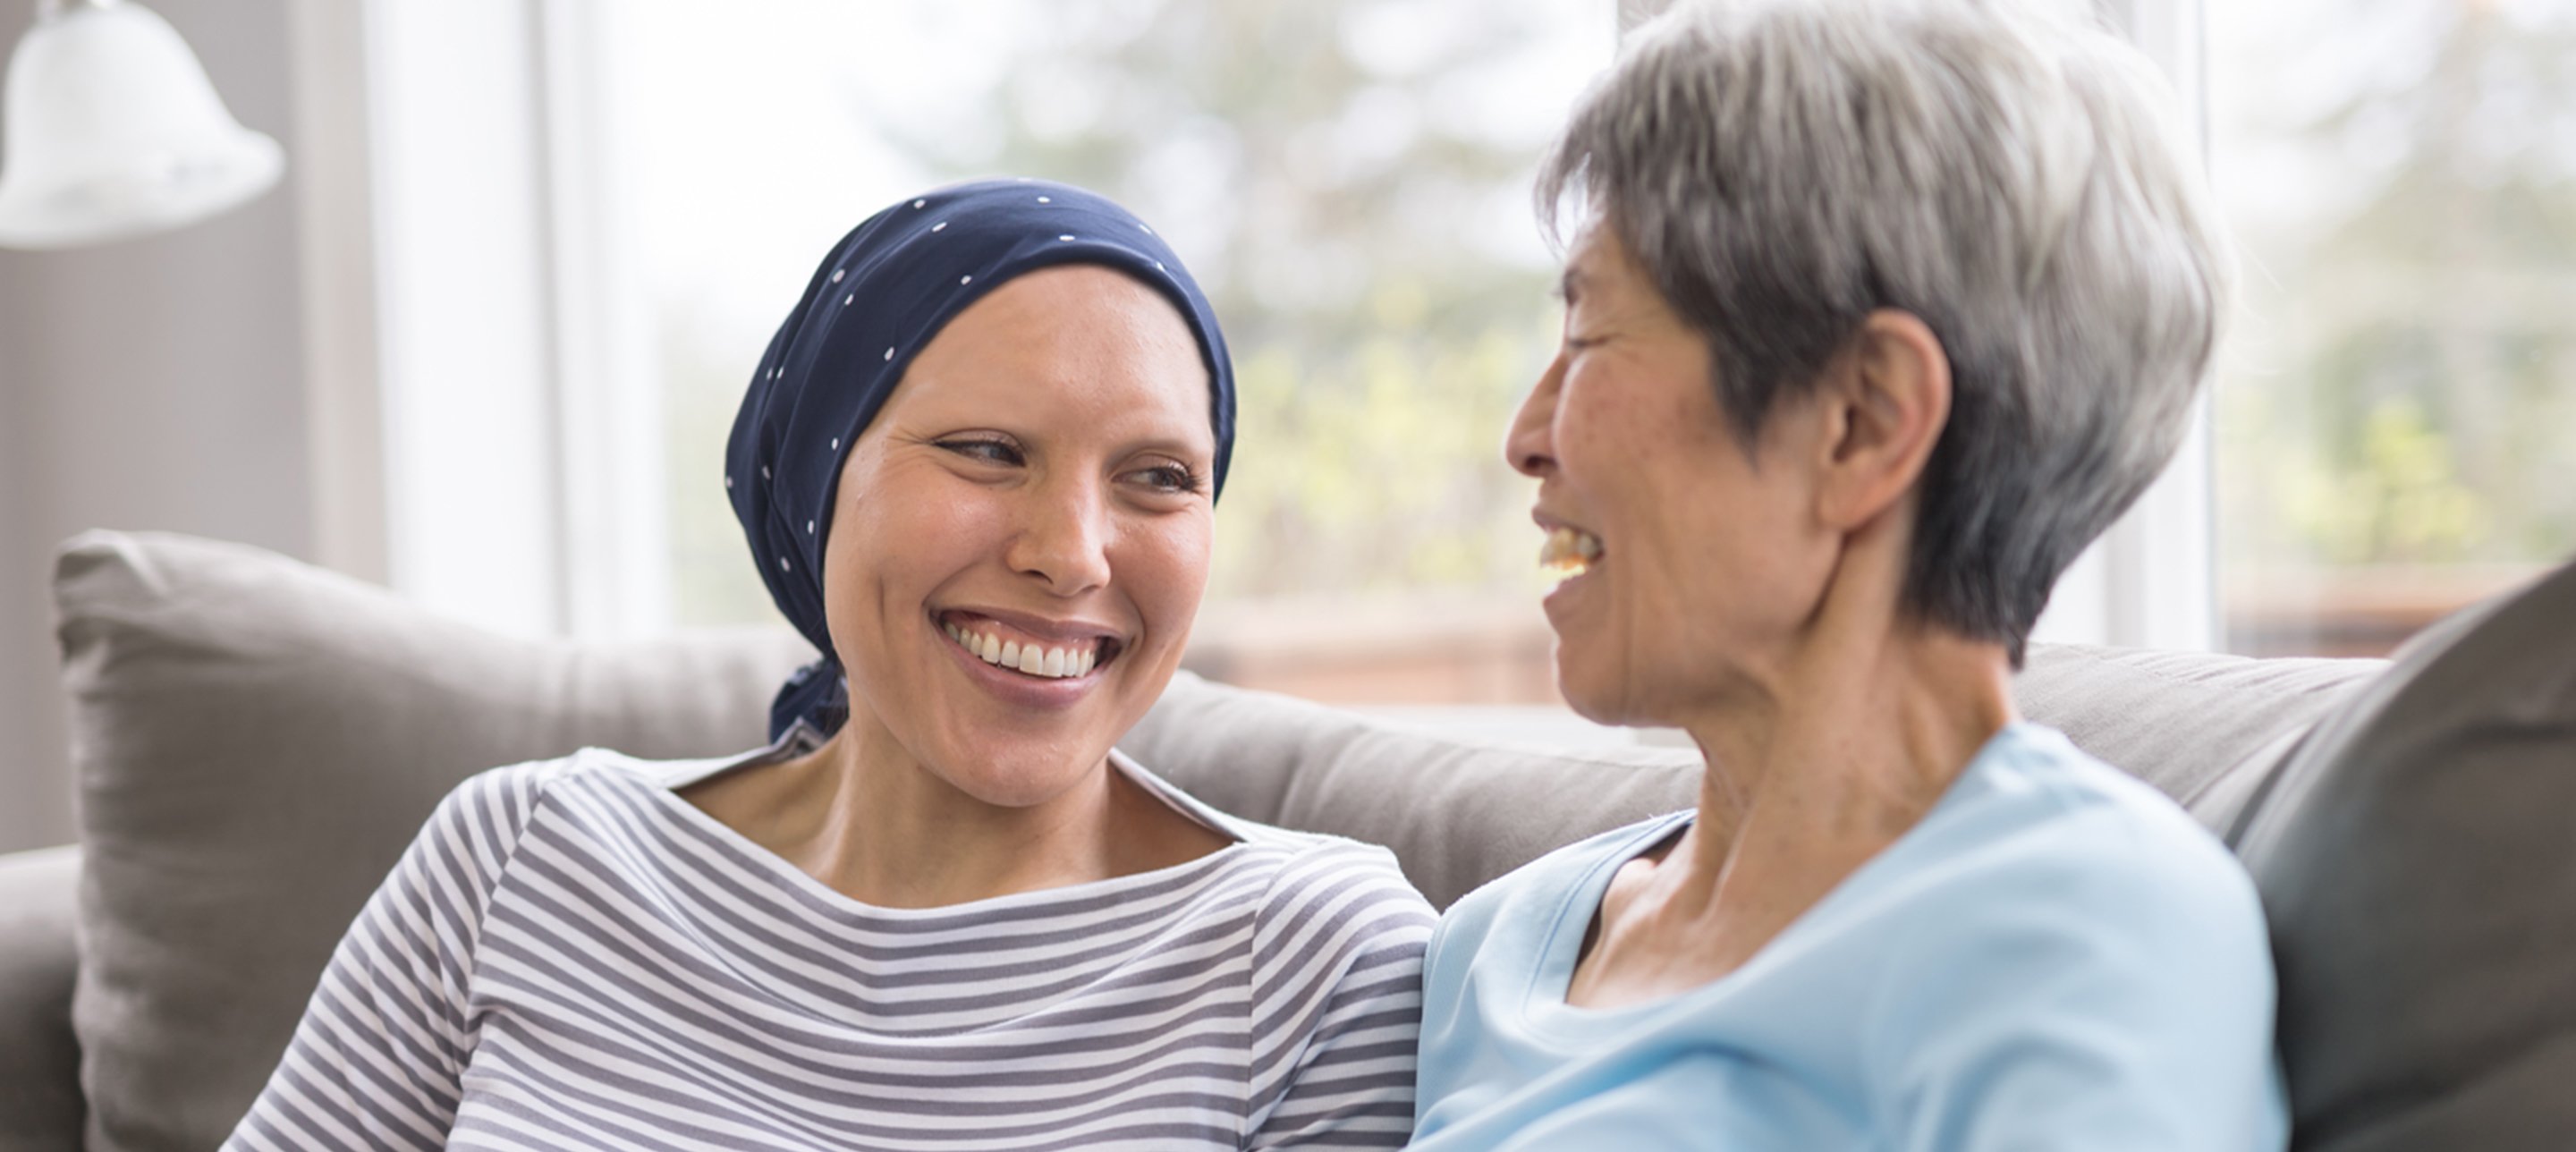 Cancer  Support Groups, Counseling, Education & Financial Assistance